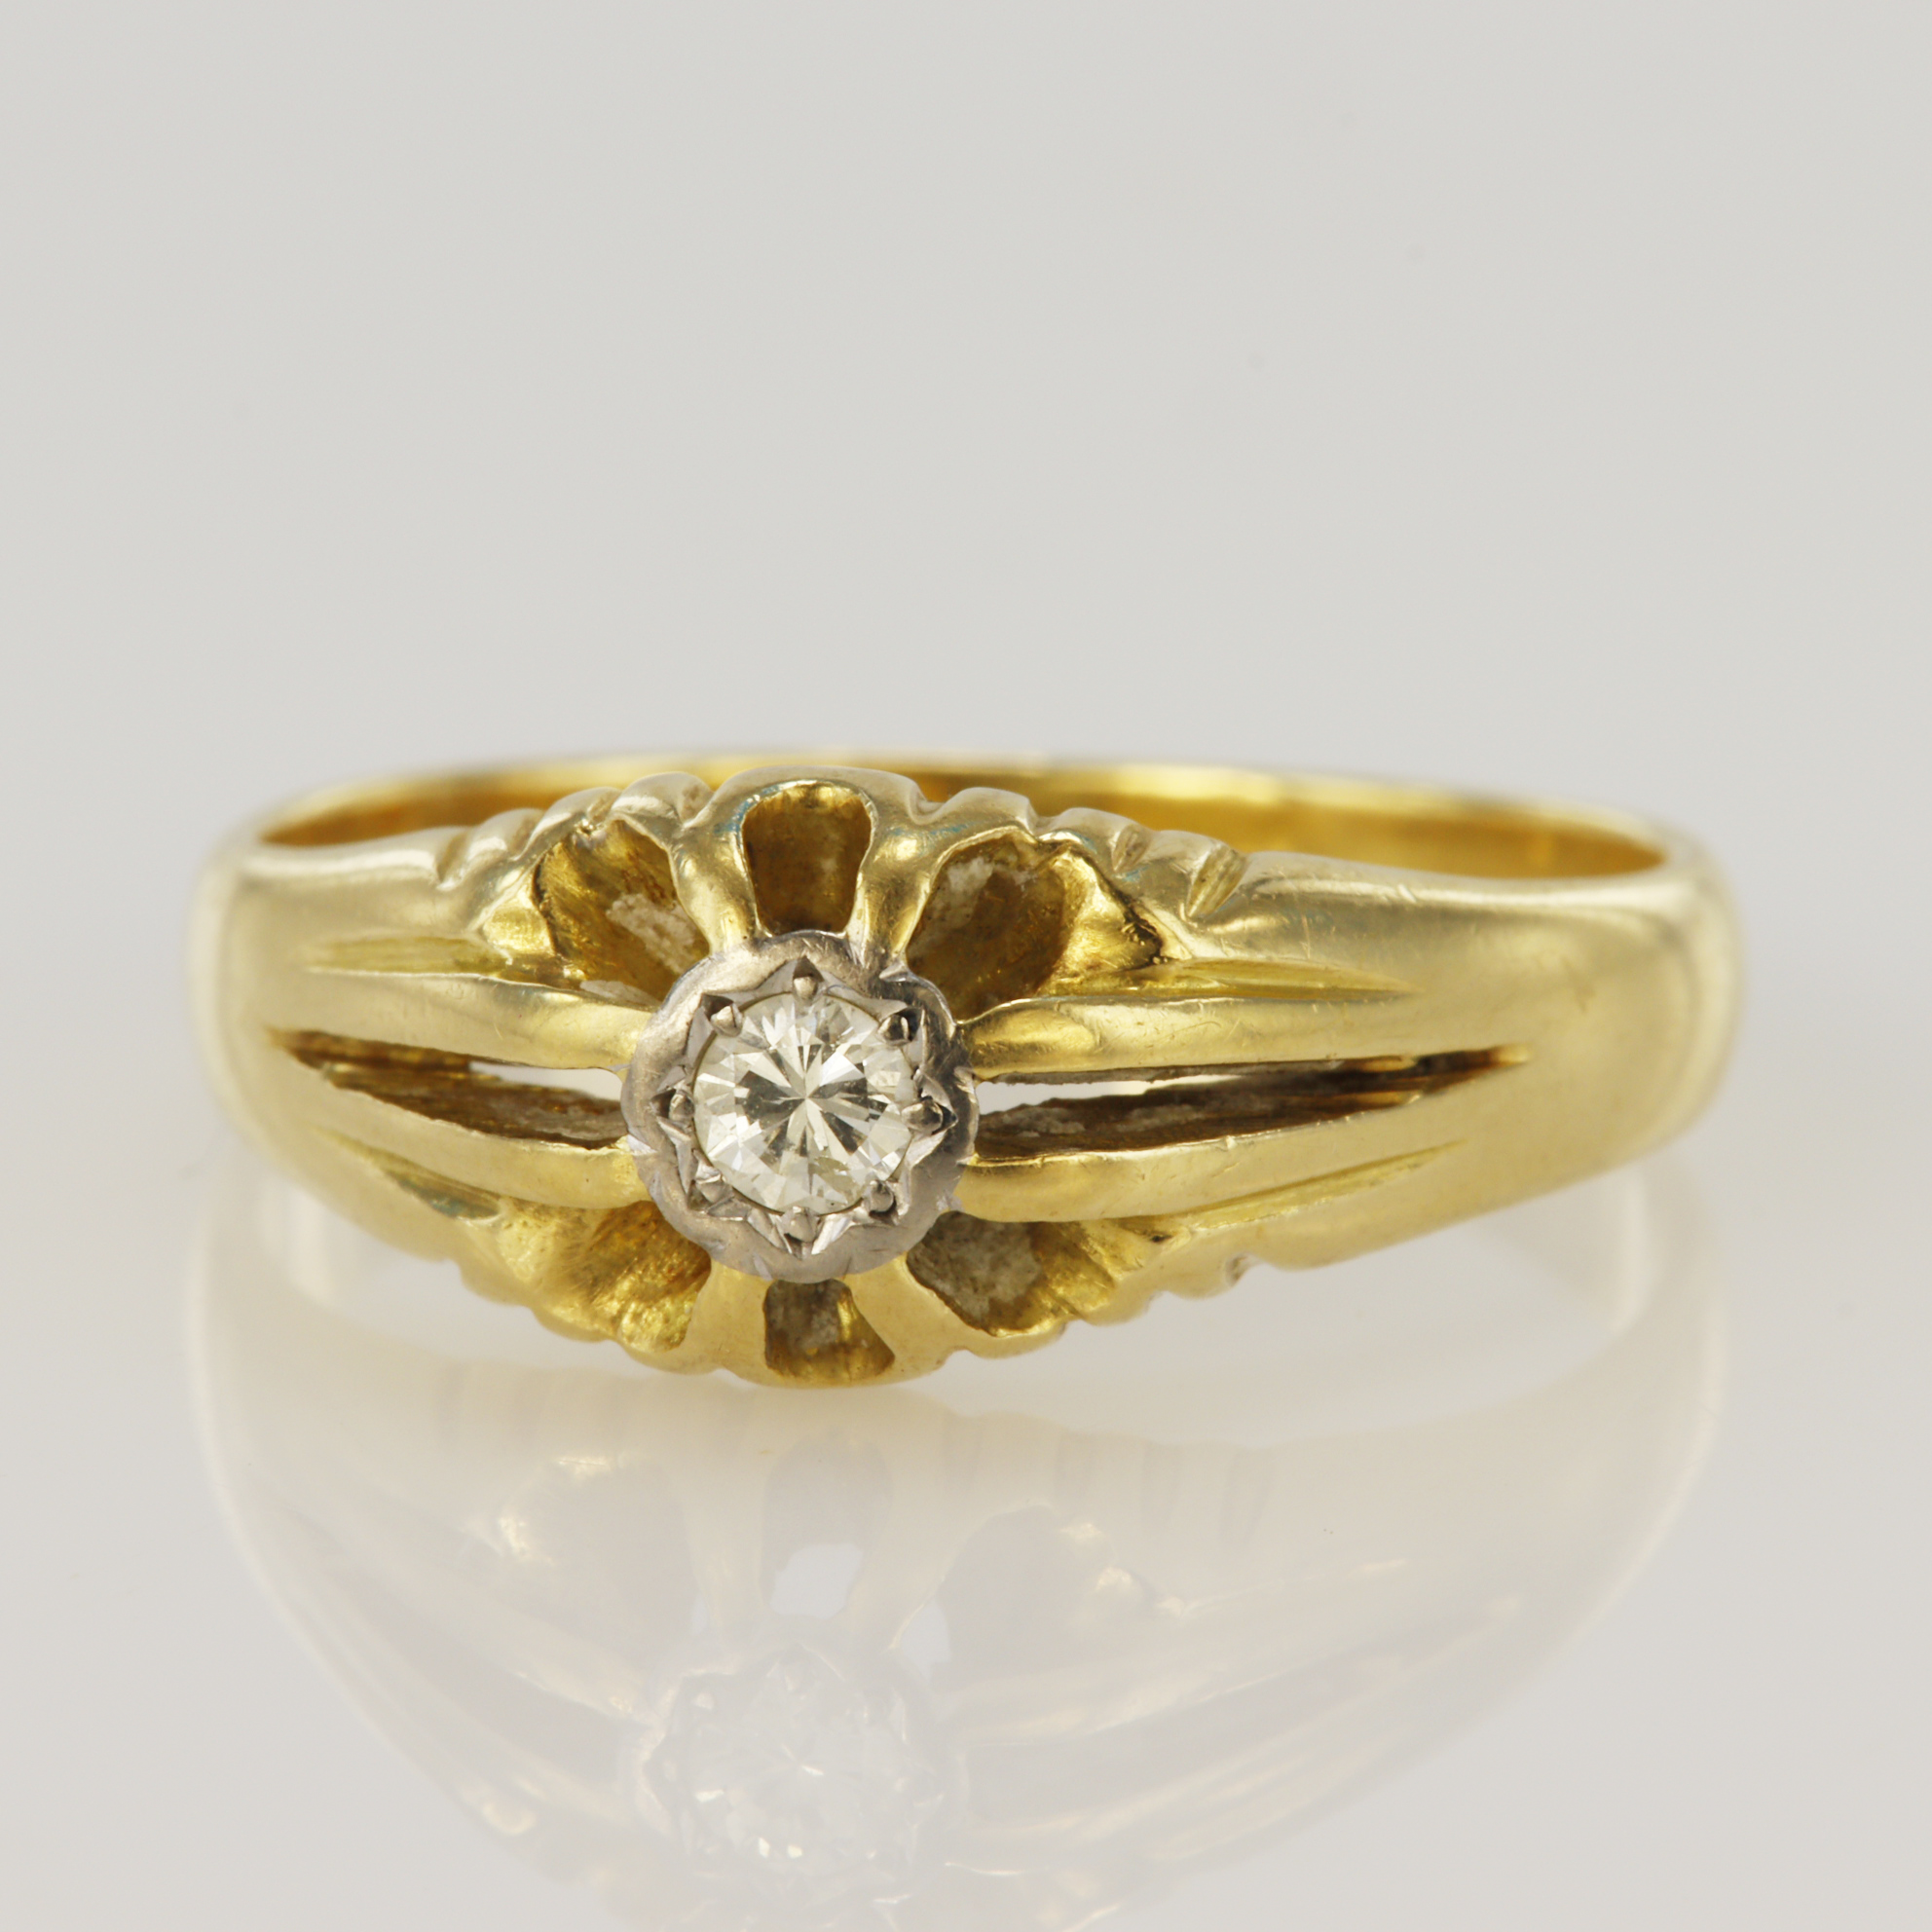 Yellow gold (tests 18ct) diamond gypsy ring, one round brillaint cut approx. 0.13ct, finger size U/